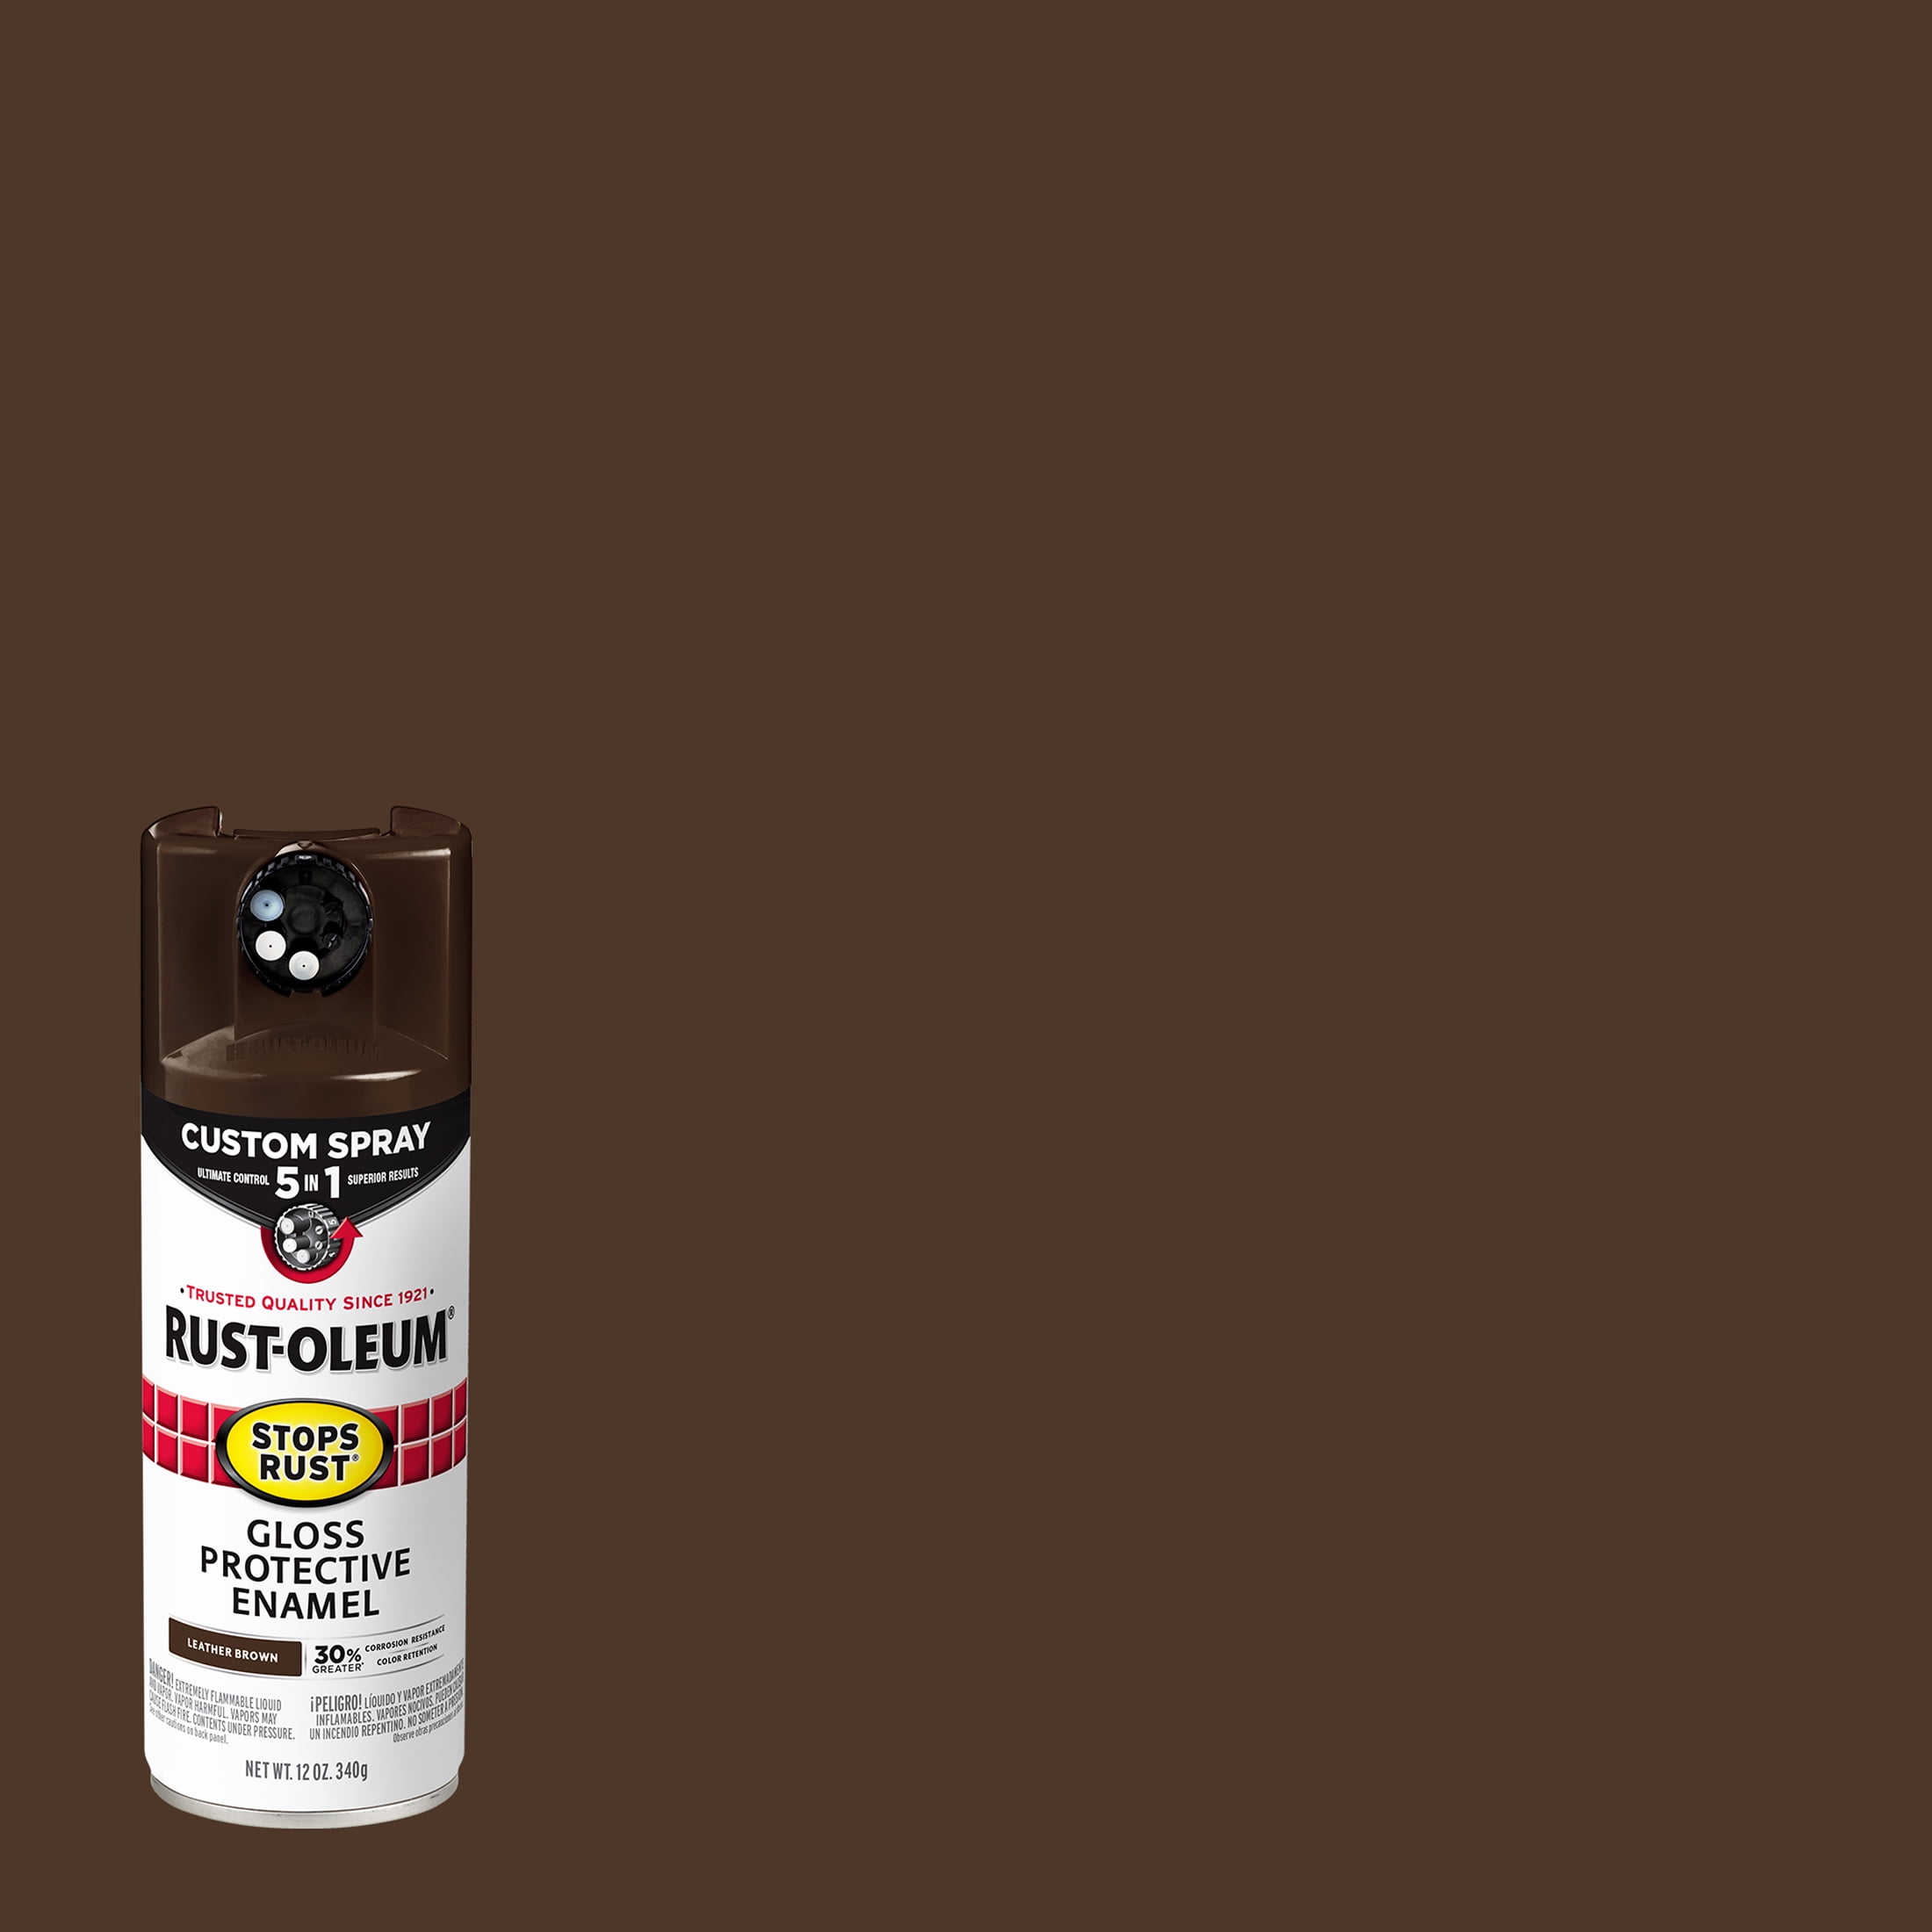 Stops Rust® Hammered Spray Paint